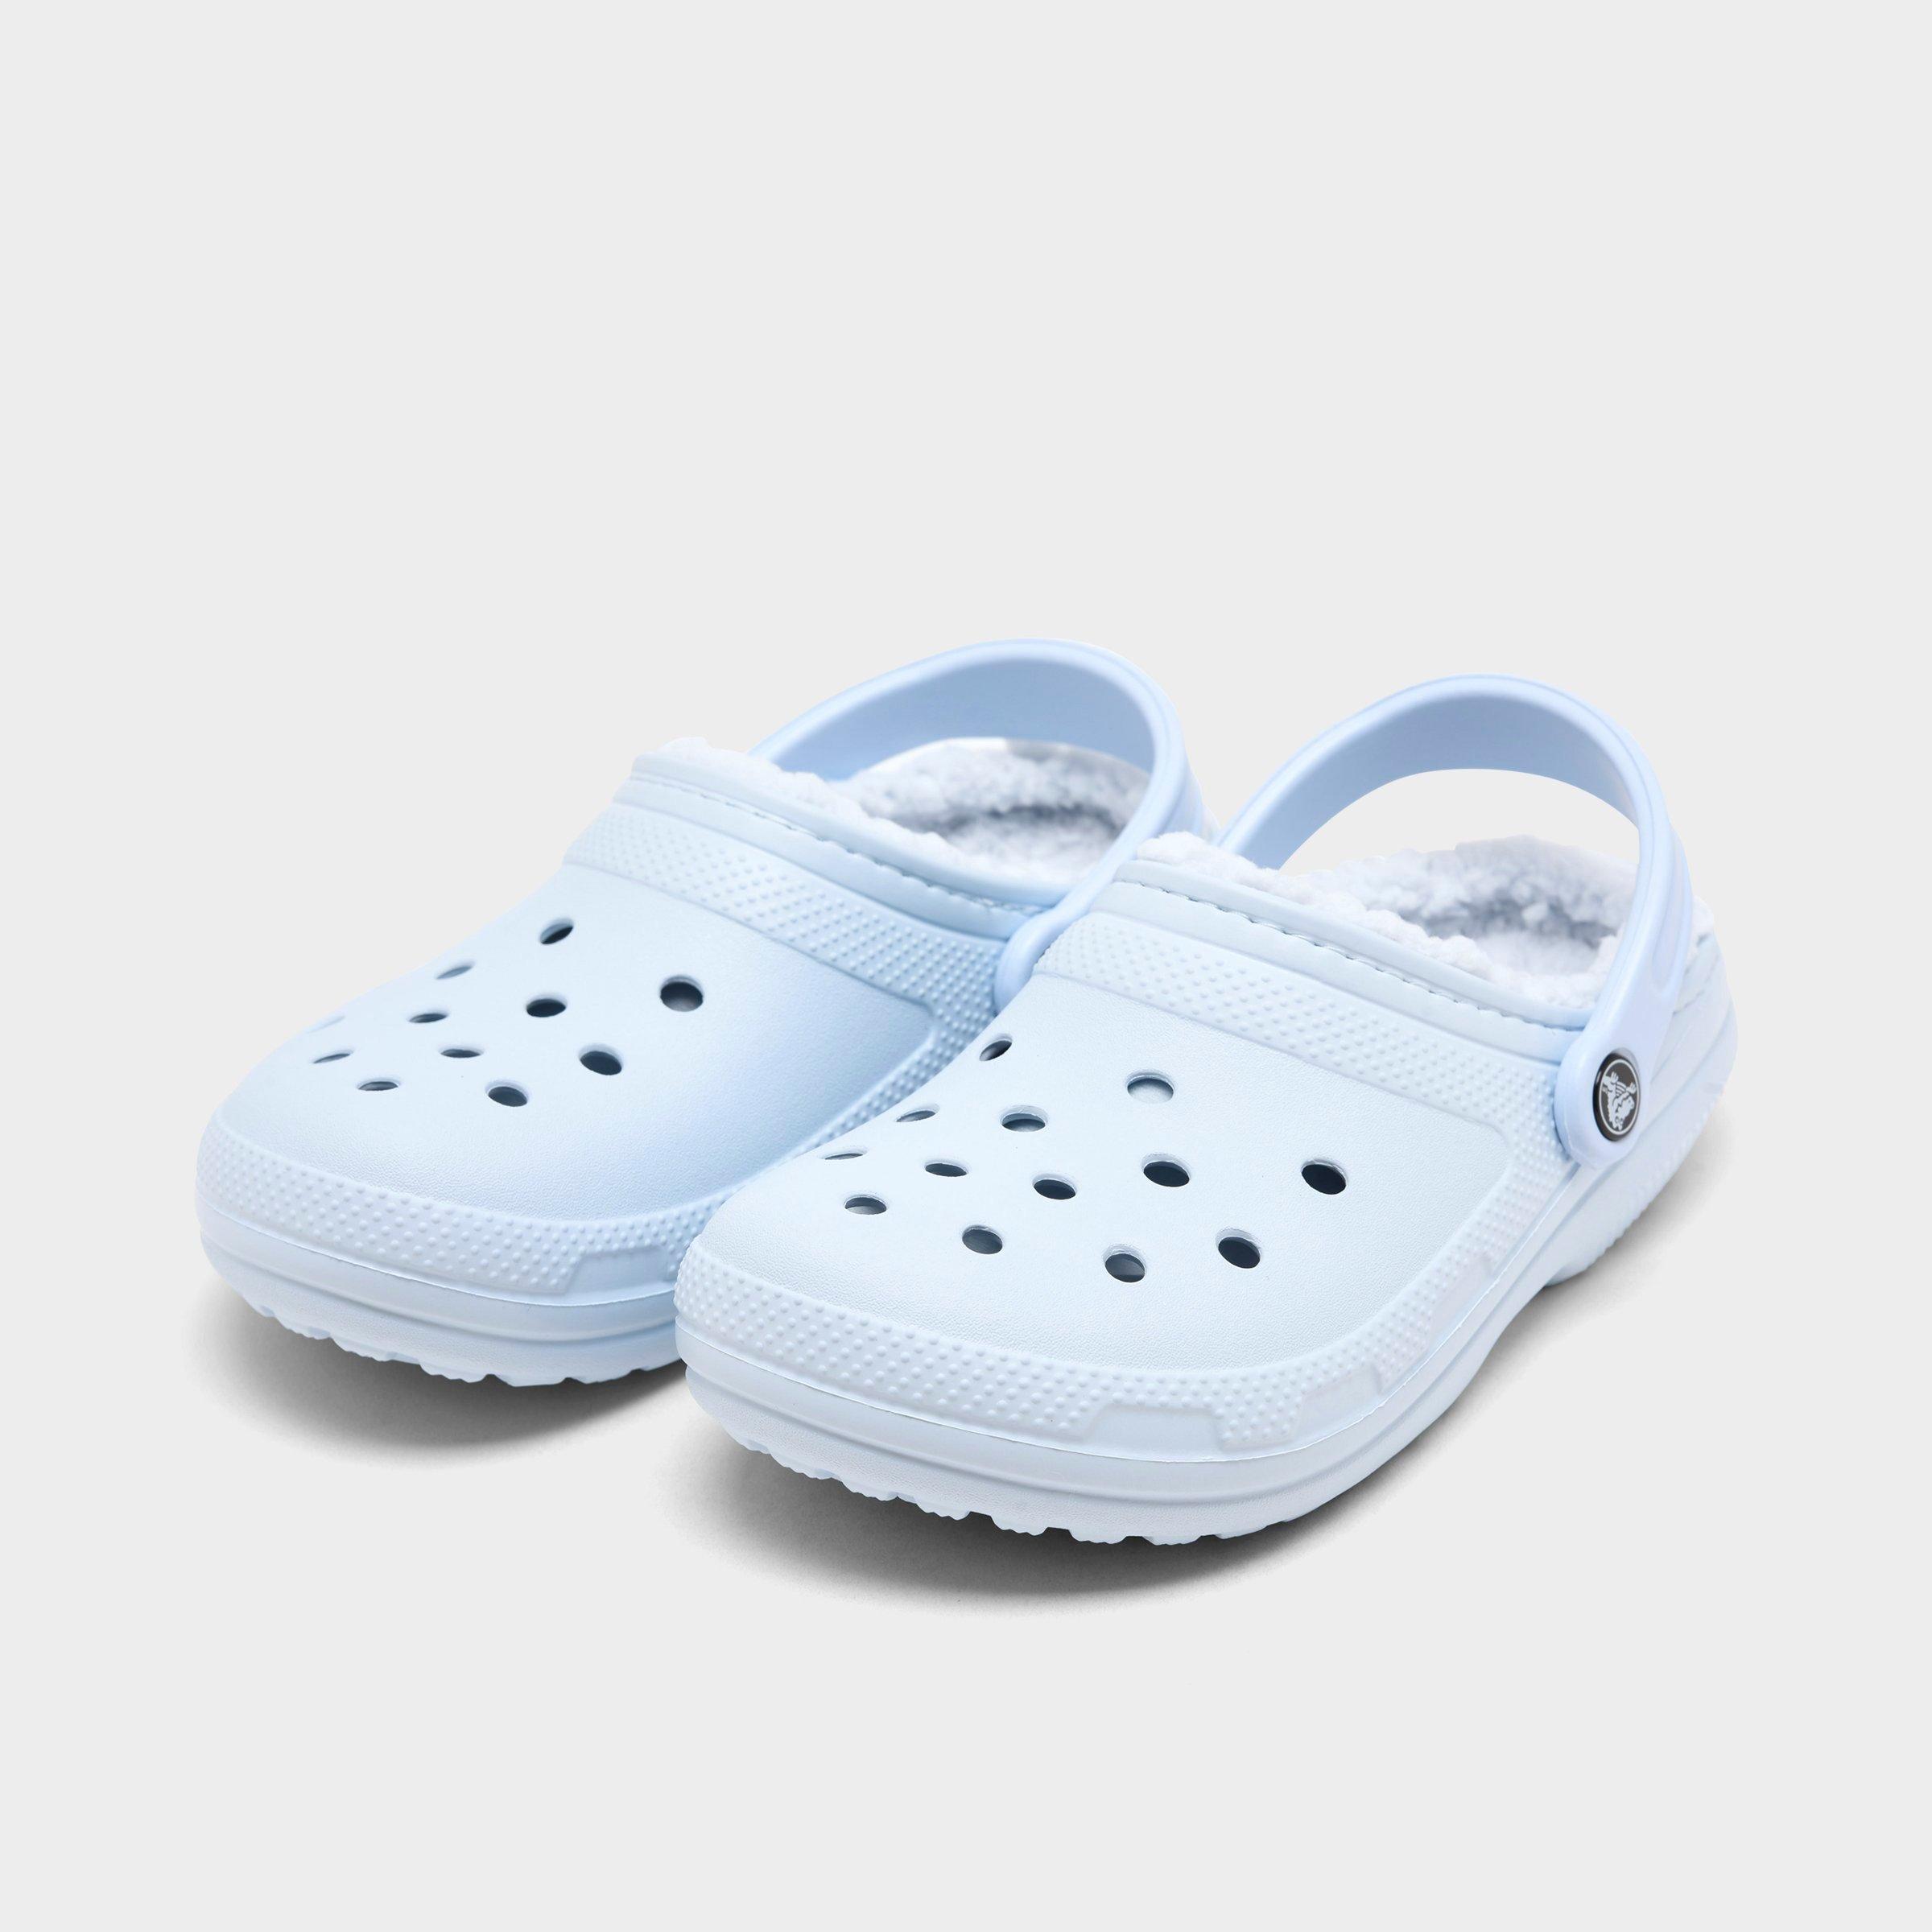 crocs with fur mineral blue